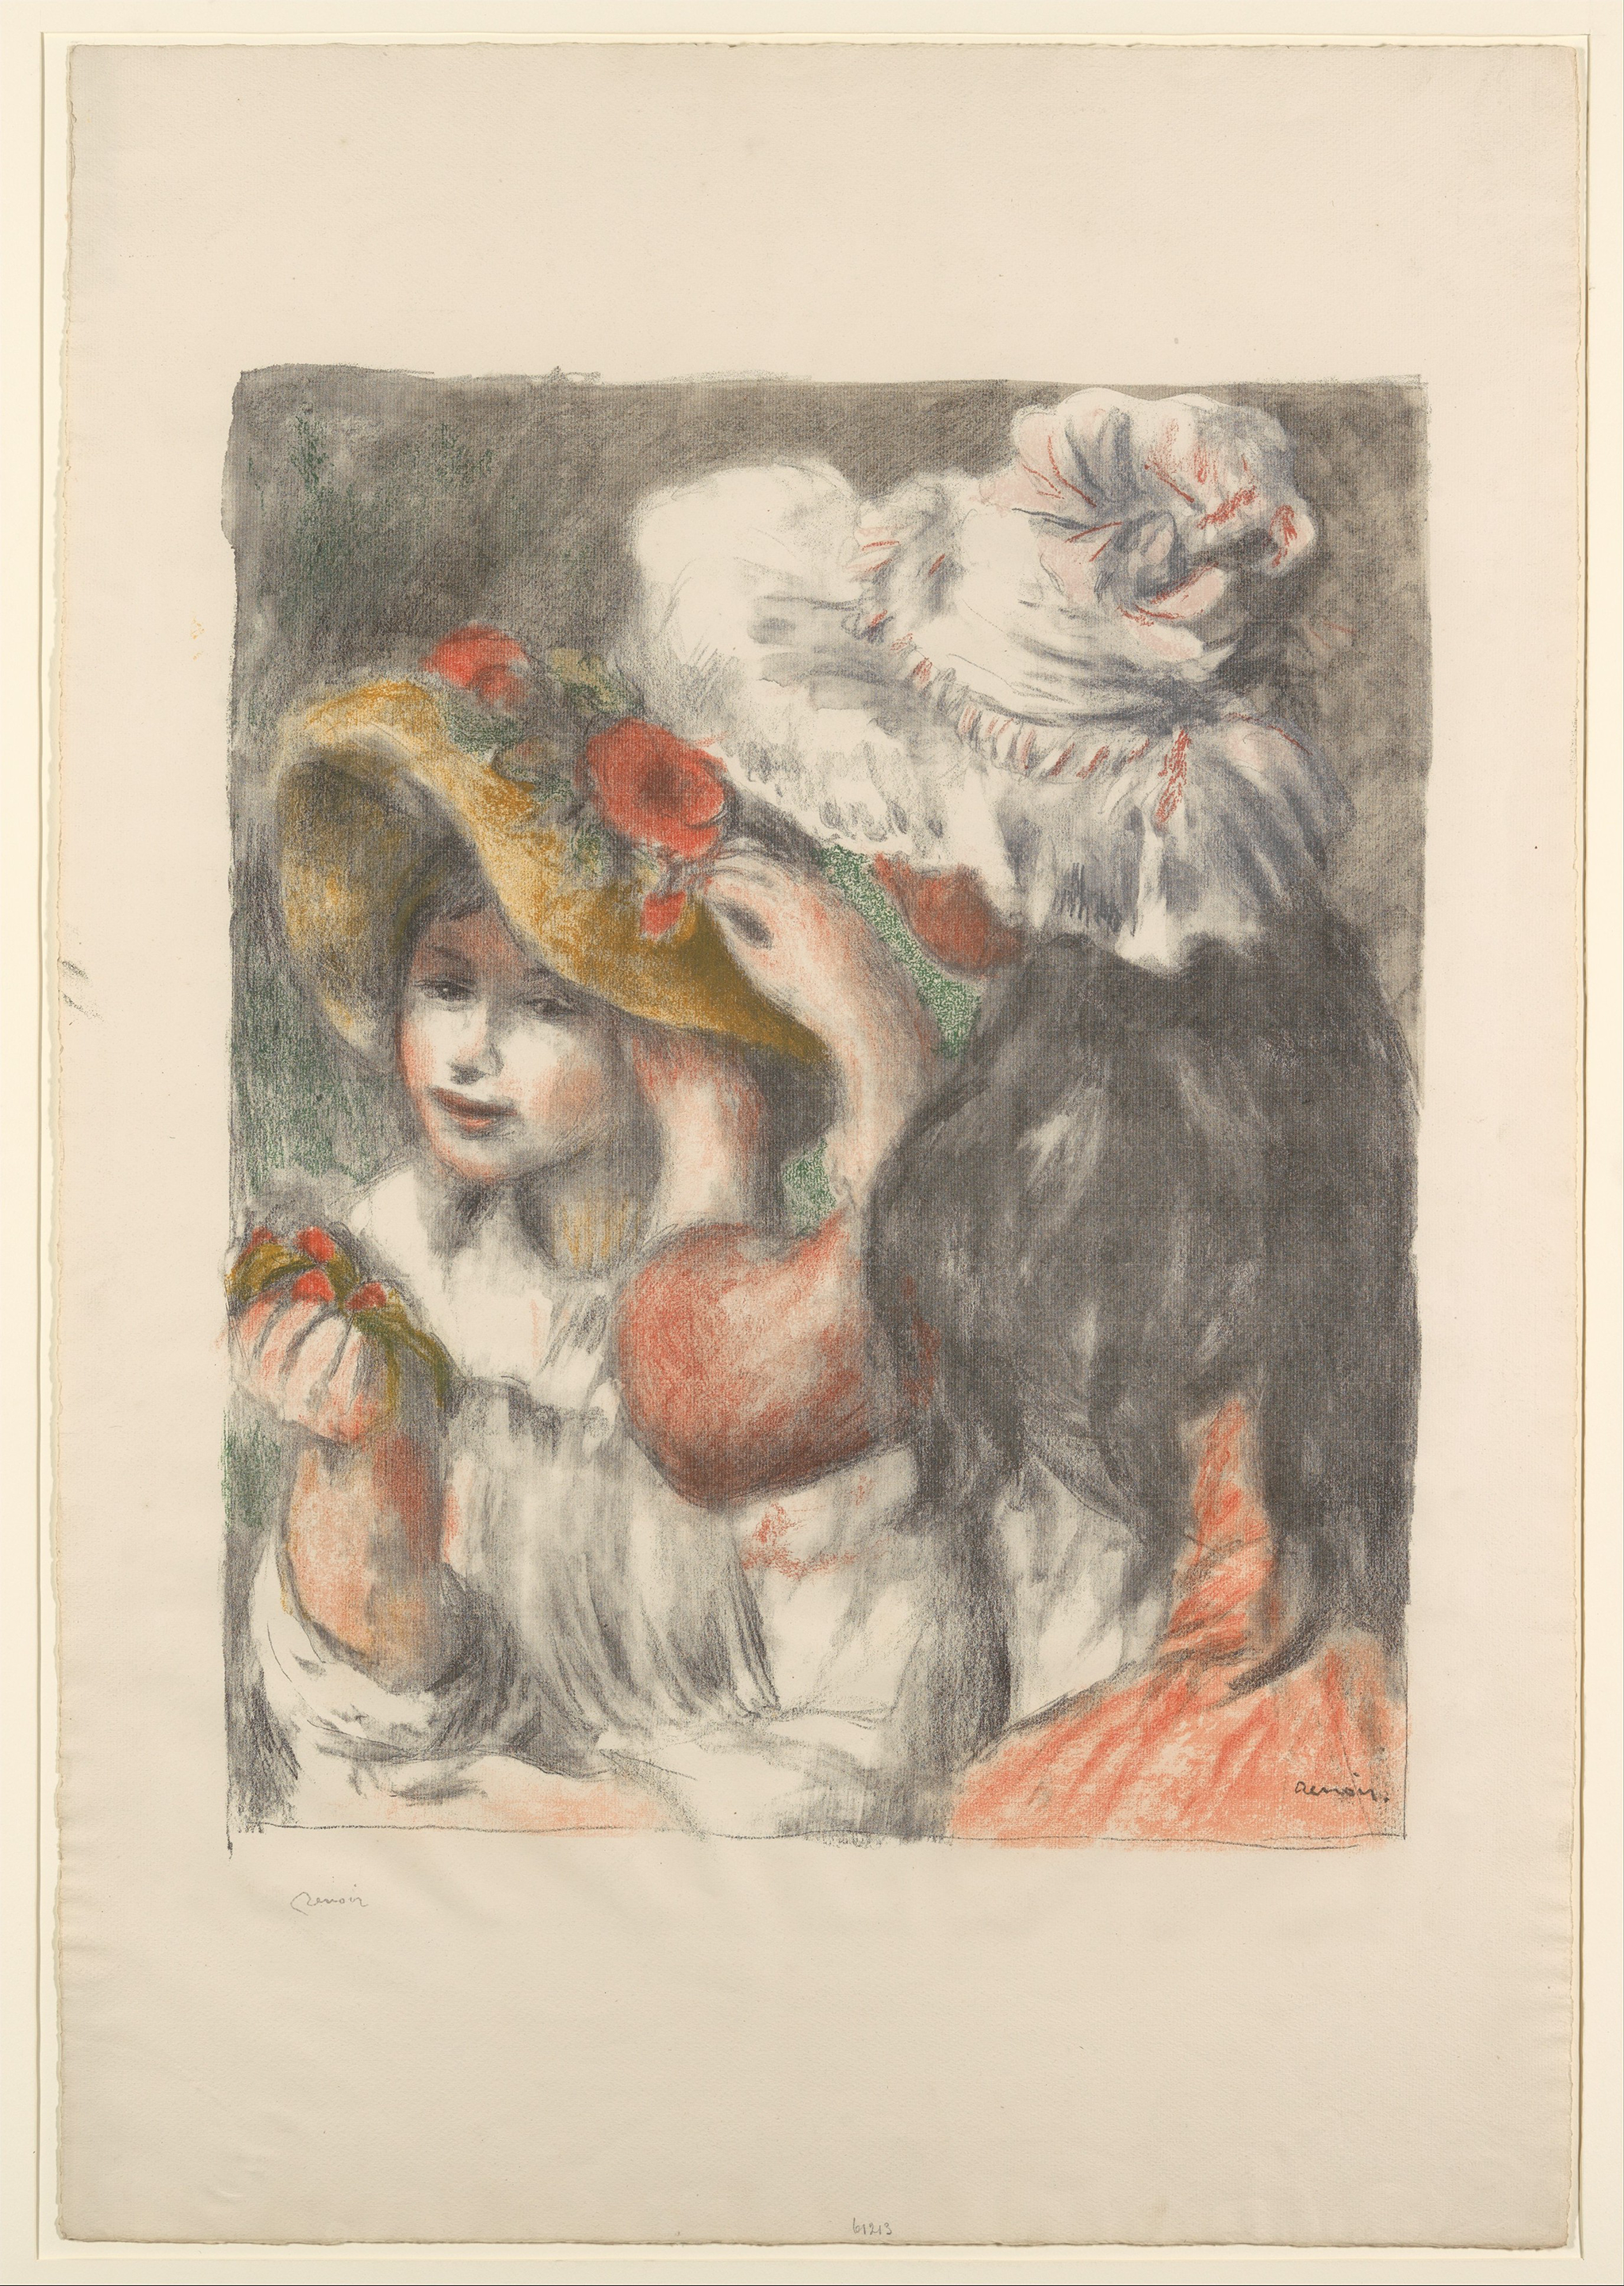 A sketch of two girls decorating a hat. On the right is a brunette seen from behind, and on the left is a strawberry blonde girl. The sketch rests on a large brown paper.